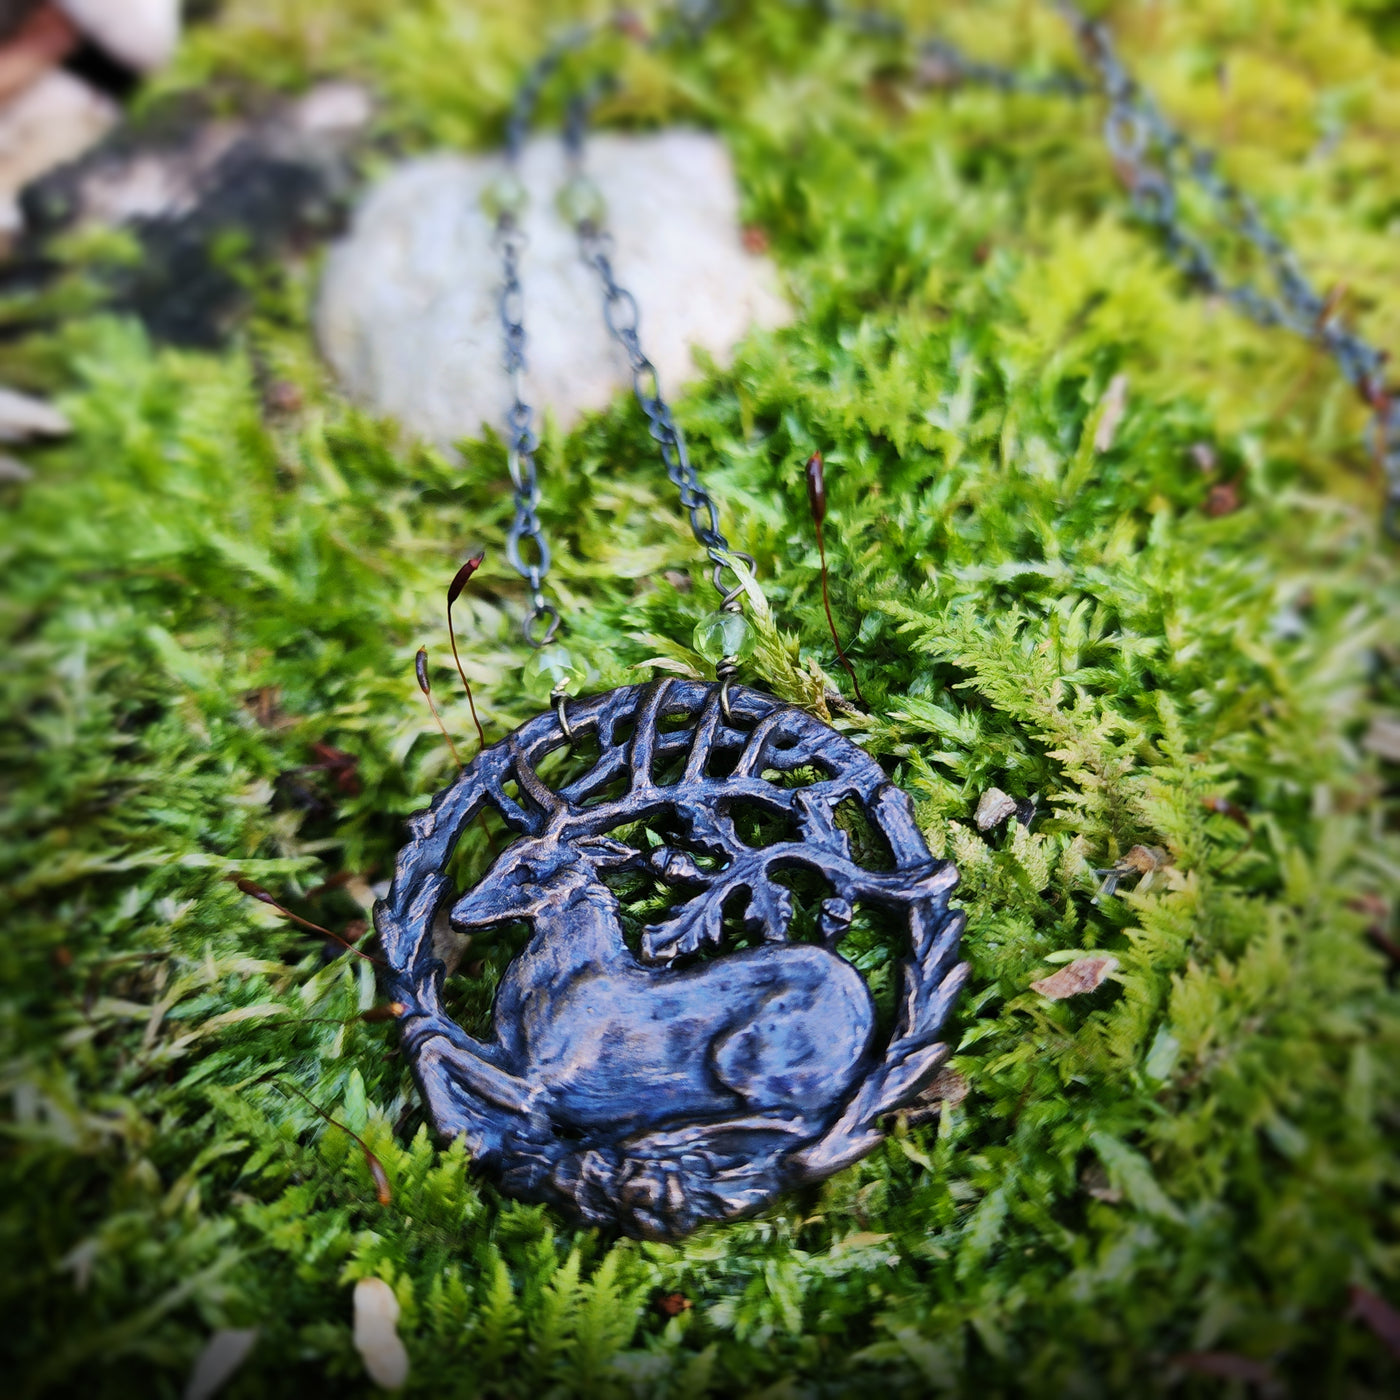 hart of the oak bower amulet - bronze & faceted peridot